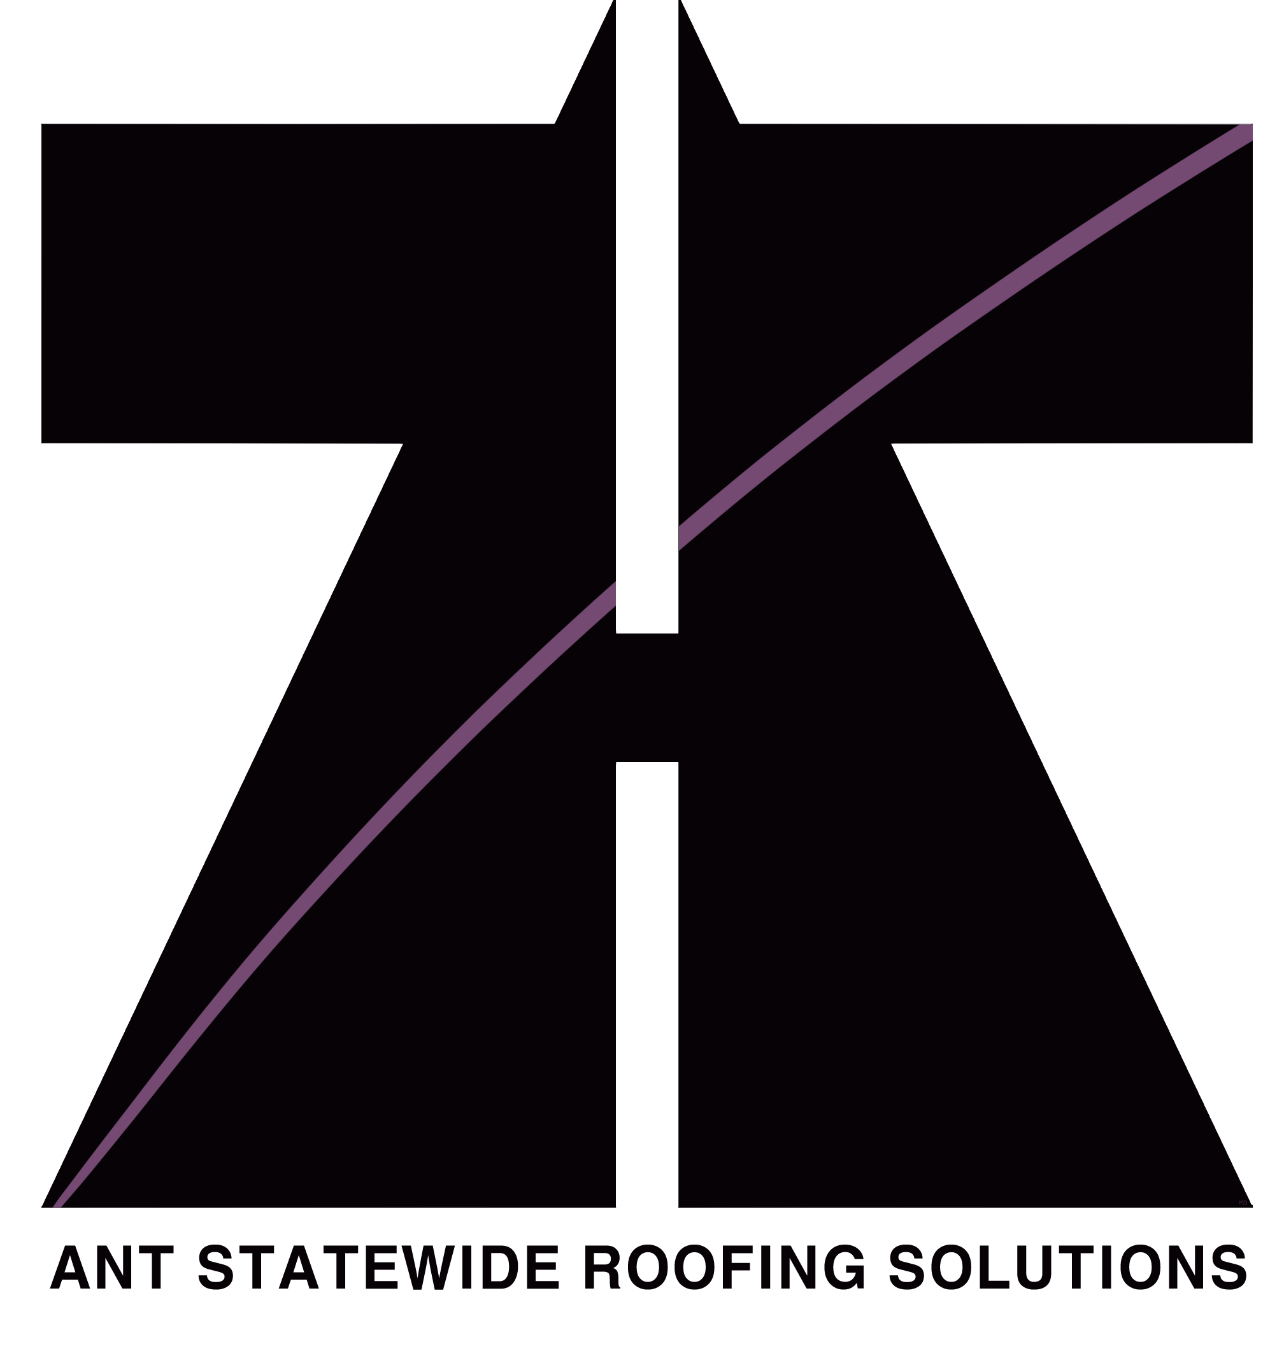 ANT Statewide Roofing Solutions 